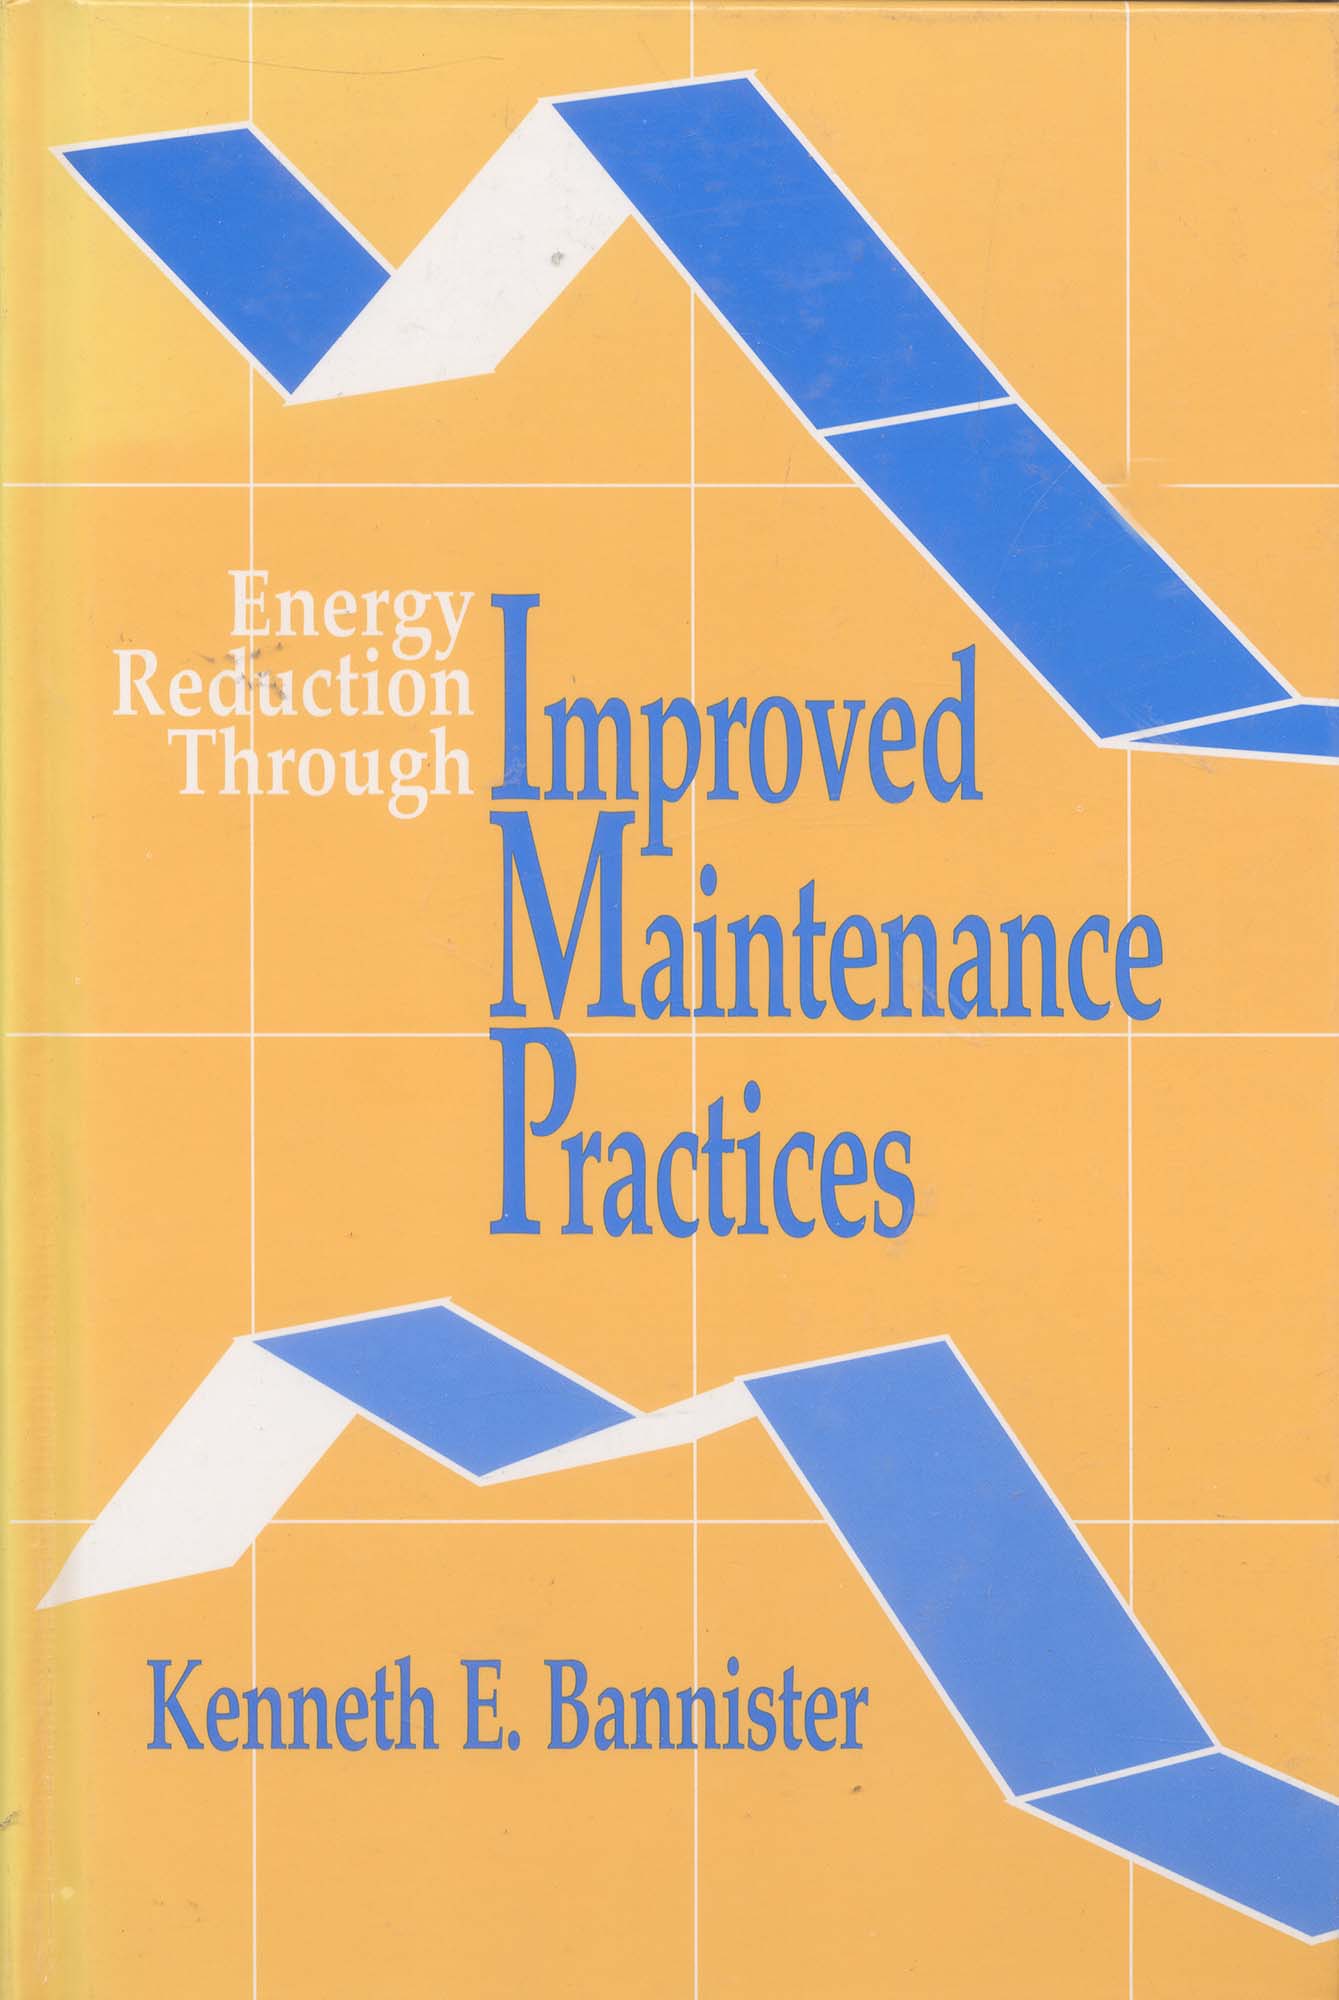 Book-Energy Reduction